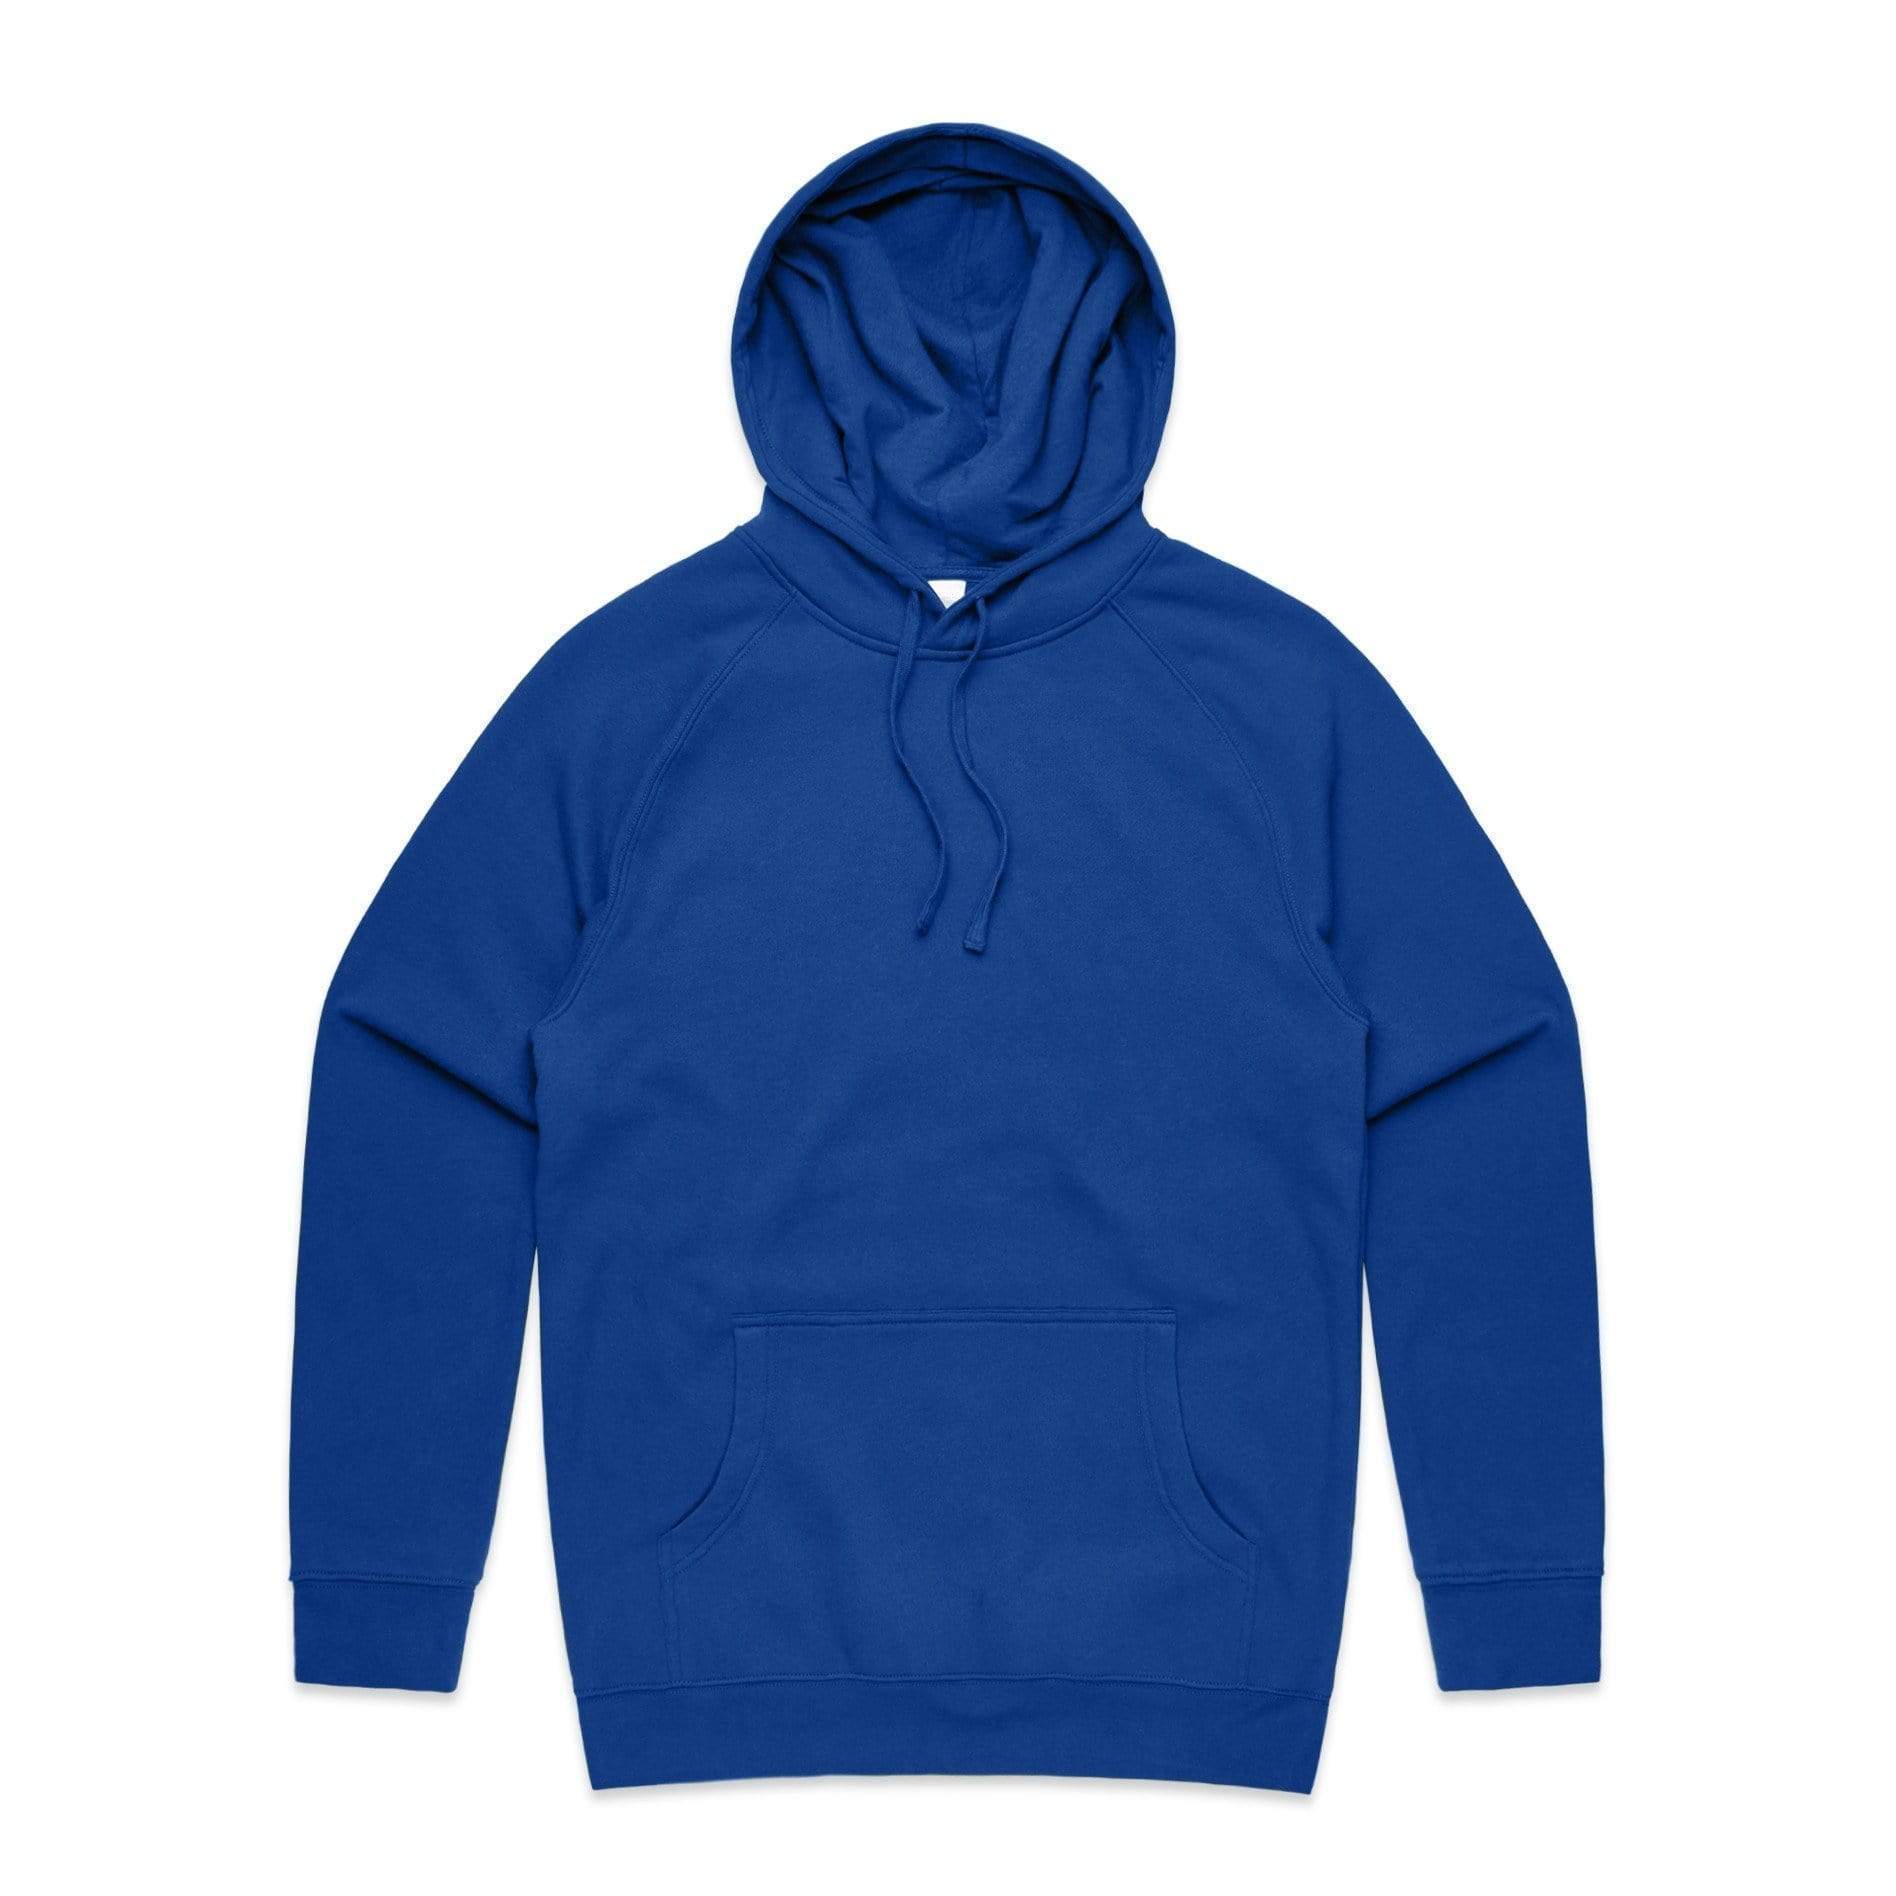 As Colour Casual Wear BRIGHT ROYAL / XSM As Colour Men's supply hoodie 5101